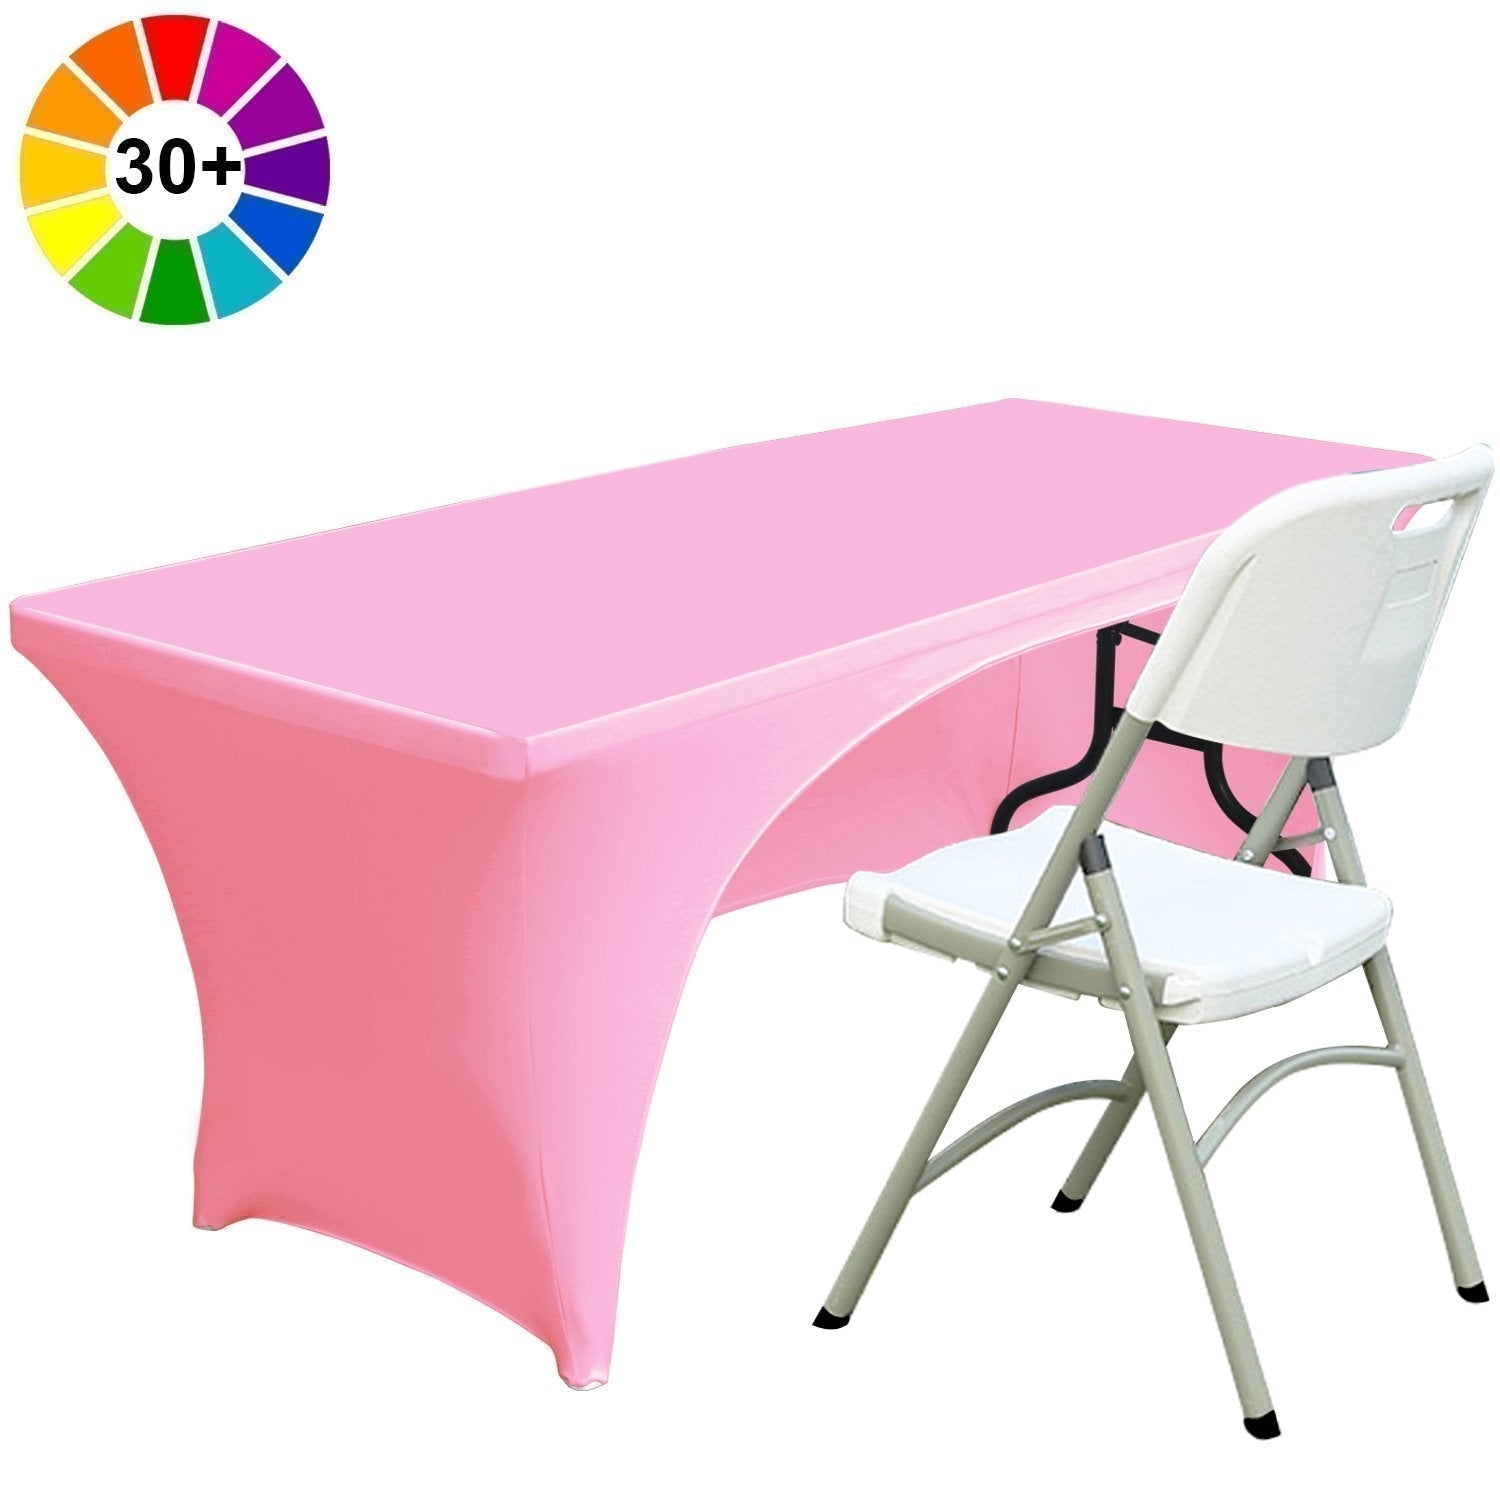 Spandex Table Cover Fitted Polyester Tablecloth (Incomplete encirclement)